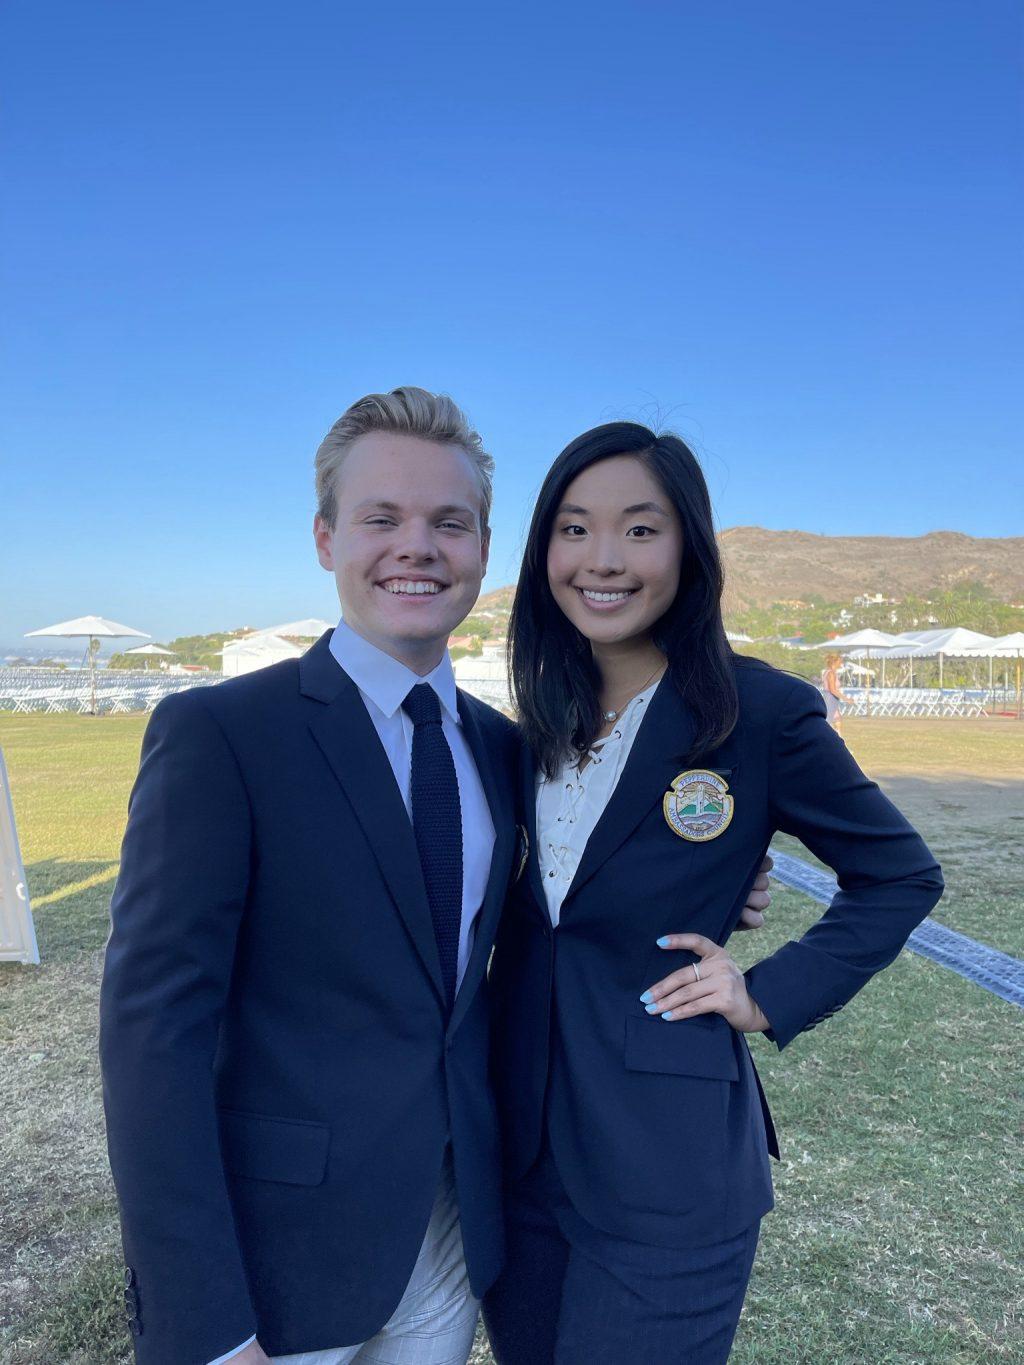 Dawson Foster and Maxine Li pose for a picture at one of the annual PAC events hosted in Alumni Park. This is just one of many events that PAC members have to attend each semester to represent the University. Photo courtesy of Dawson Foster